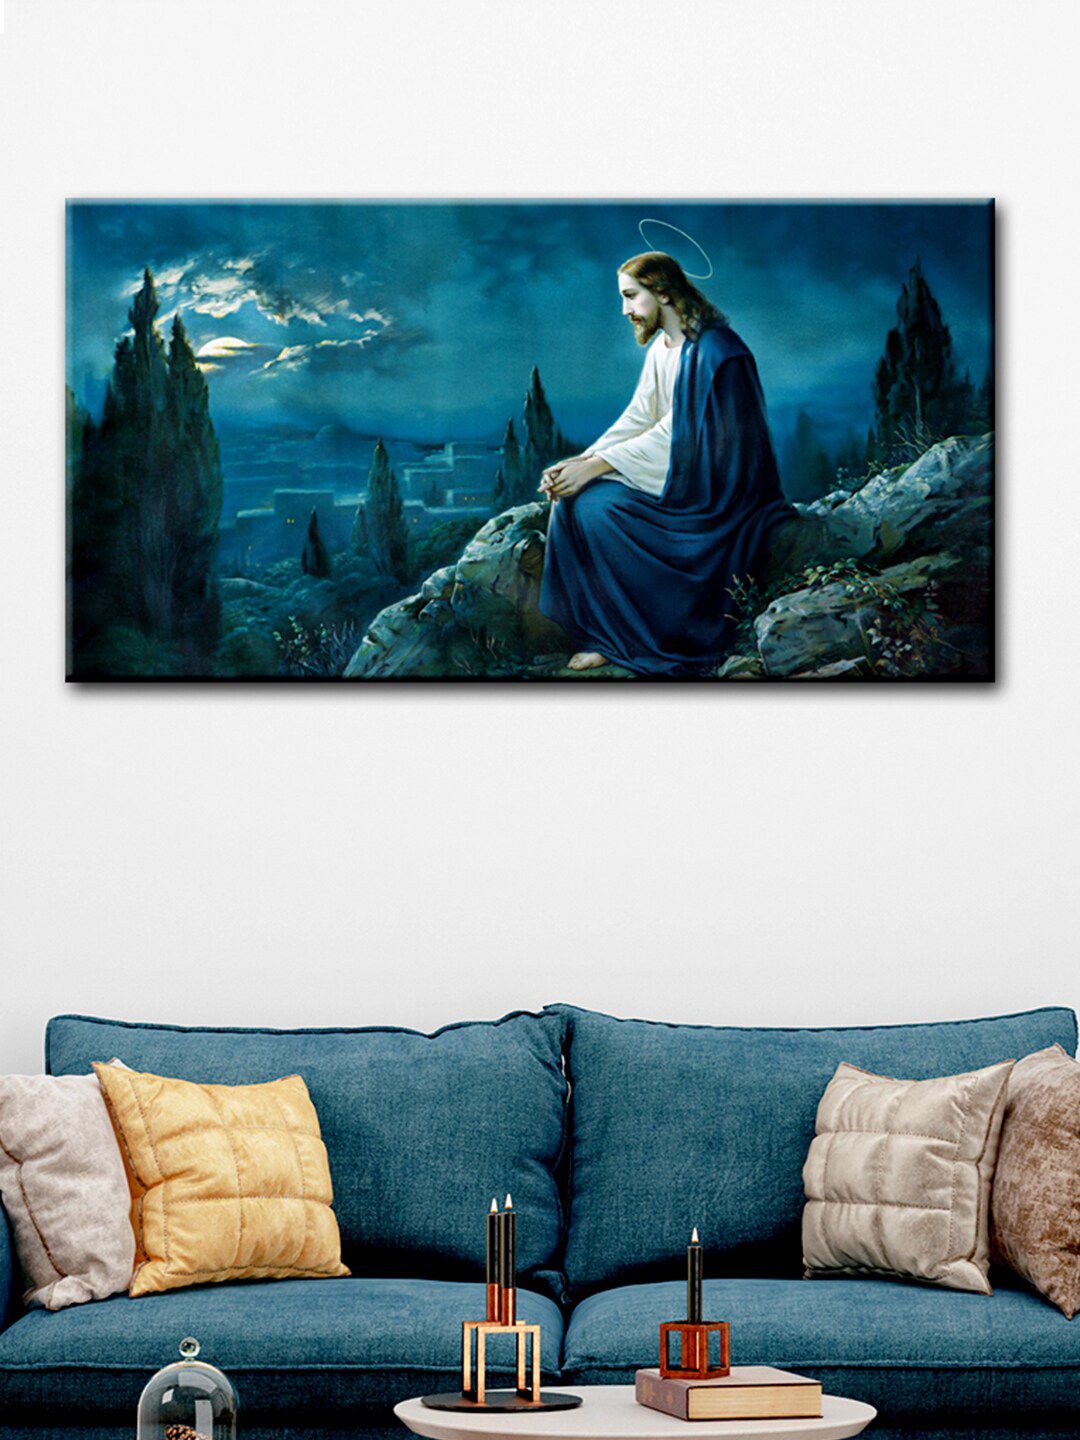 WALLMANTRA Blue Goad Jesus Beautiful Scenery Canvas Printed Painting Price in India